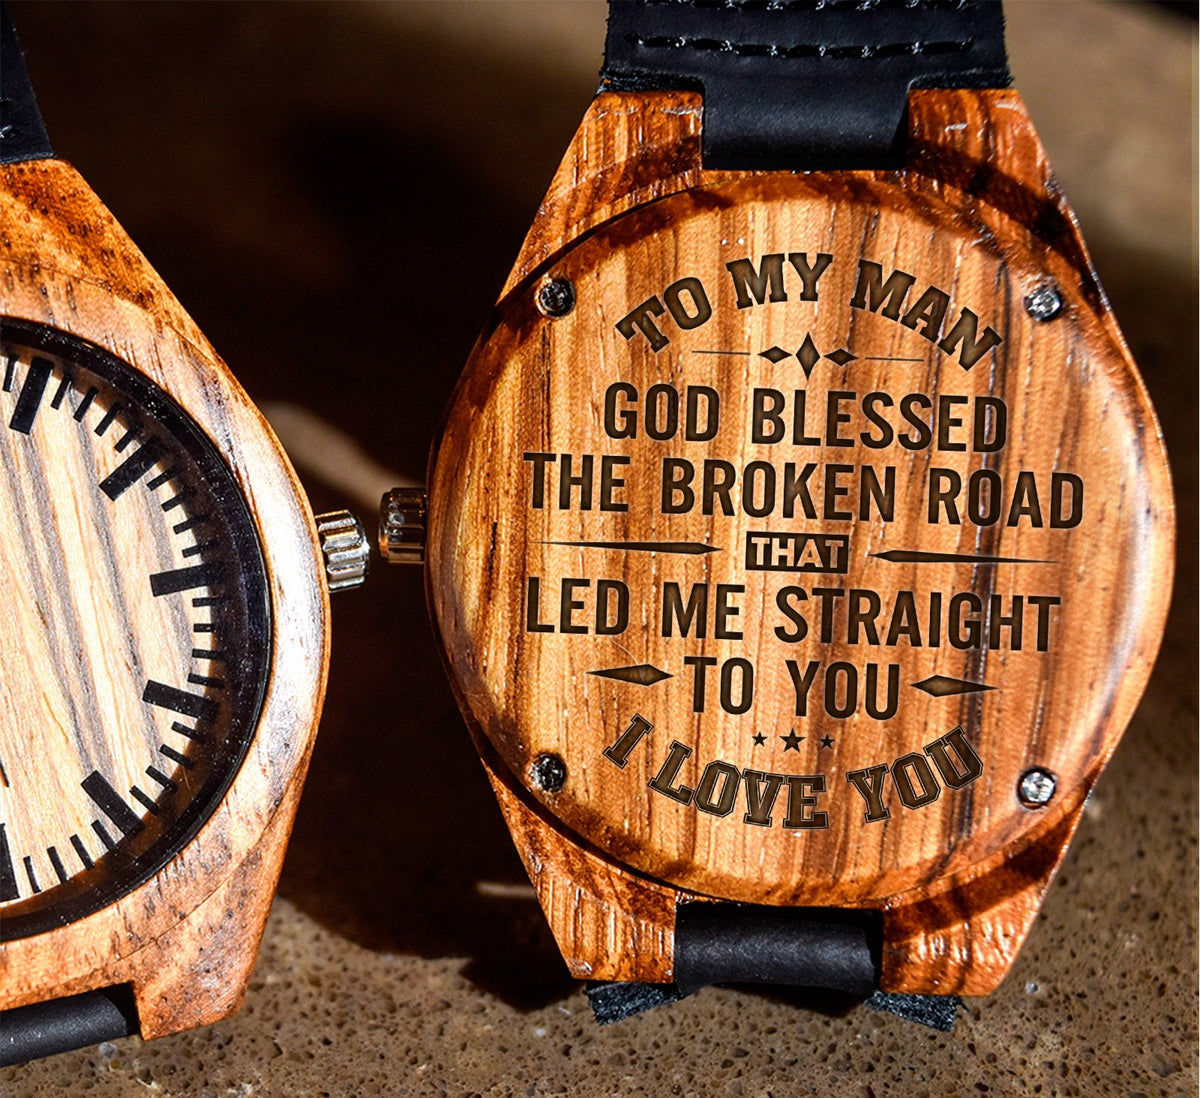 To My Man - God Blessed The Broken Road That Led Me Straight To You - Wooden Watch